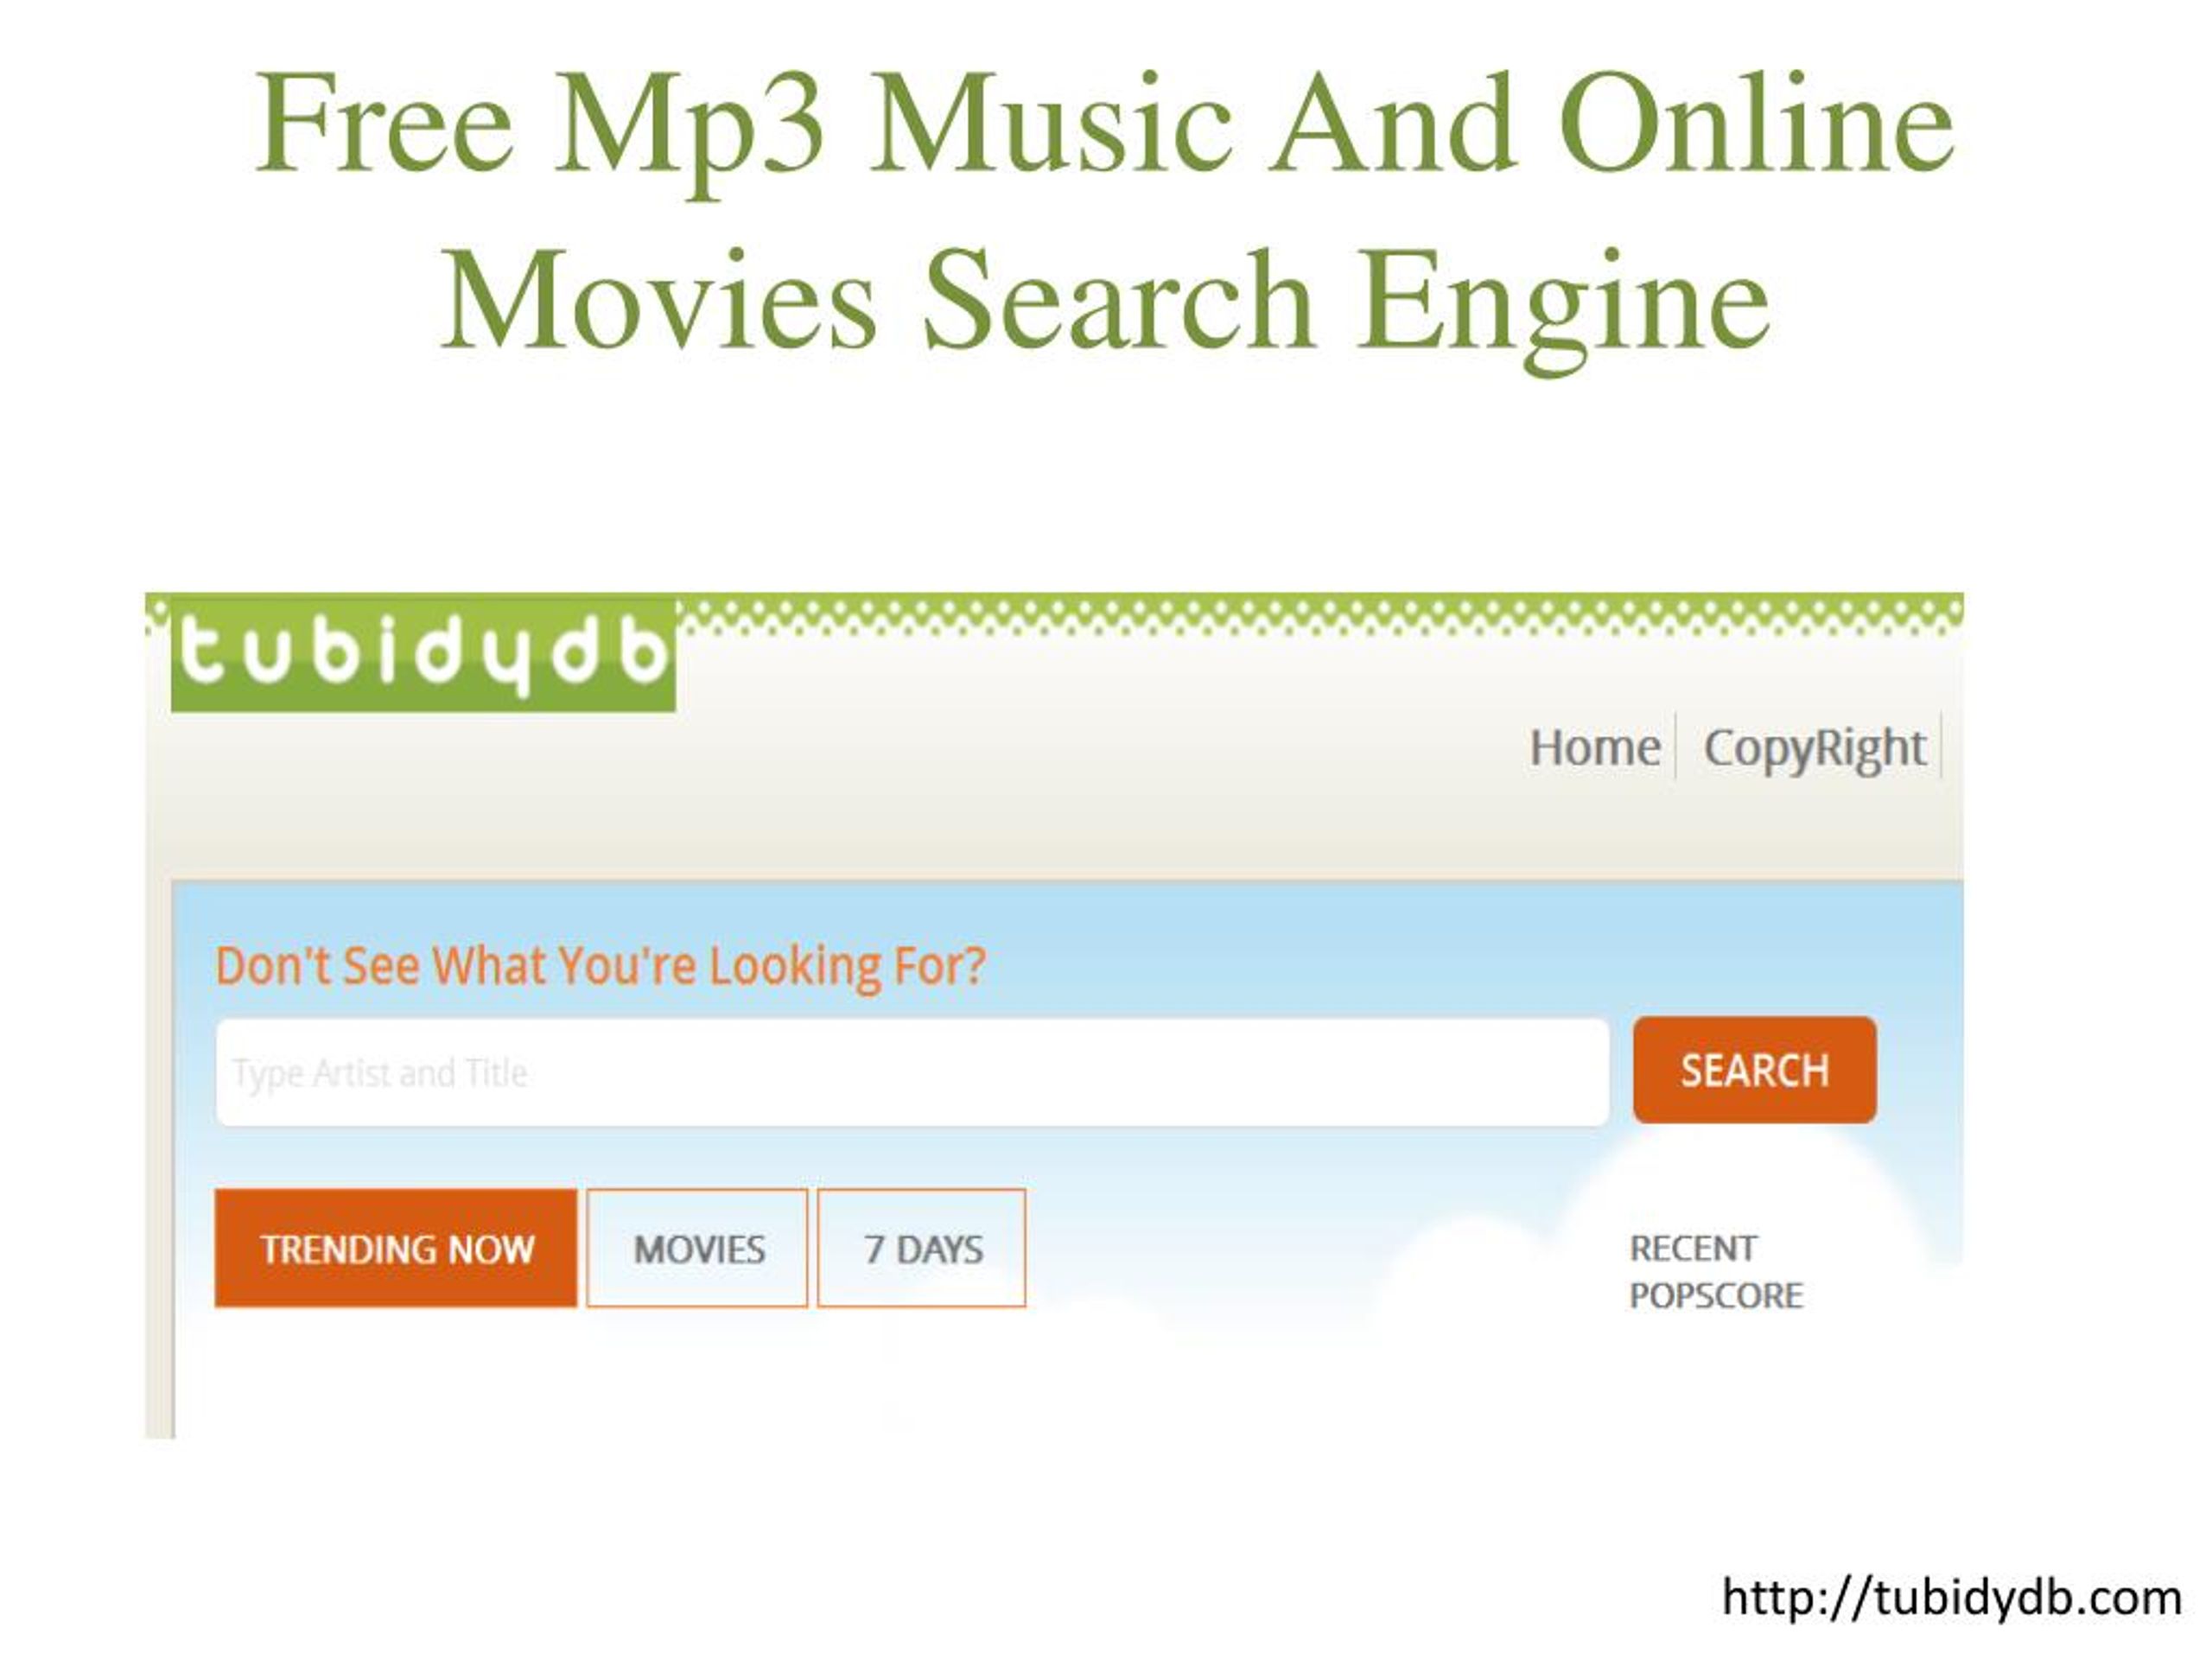 doug benner recommends Tubidy Free Mp3 Search Engine